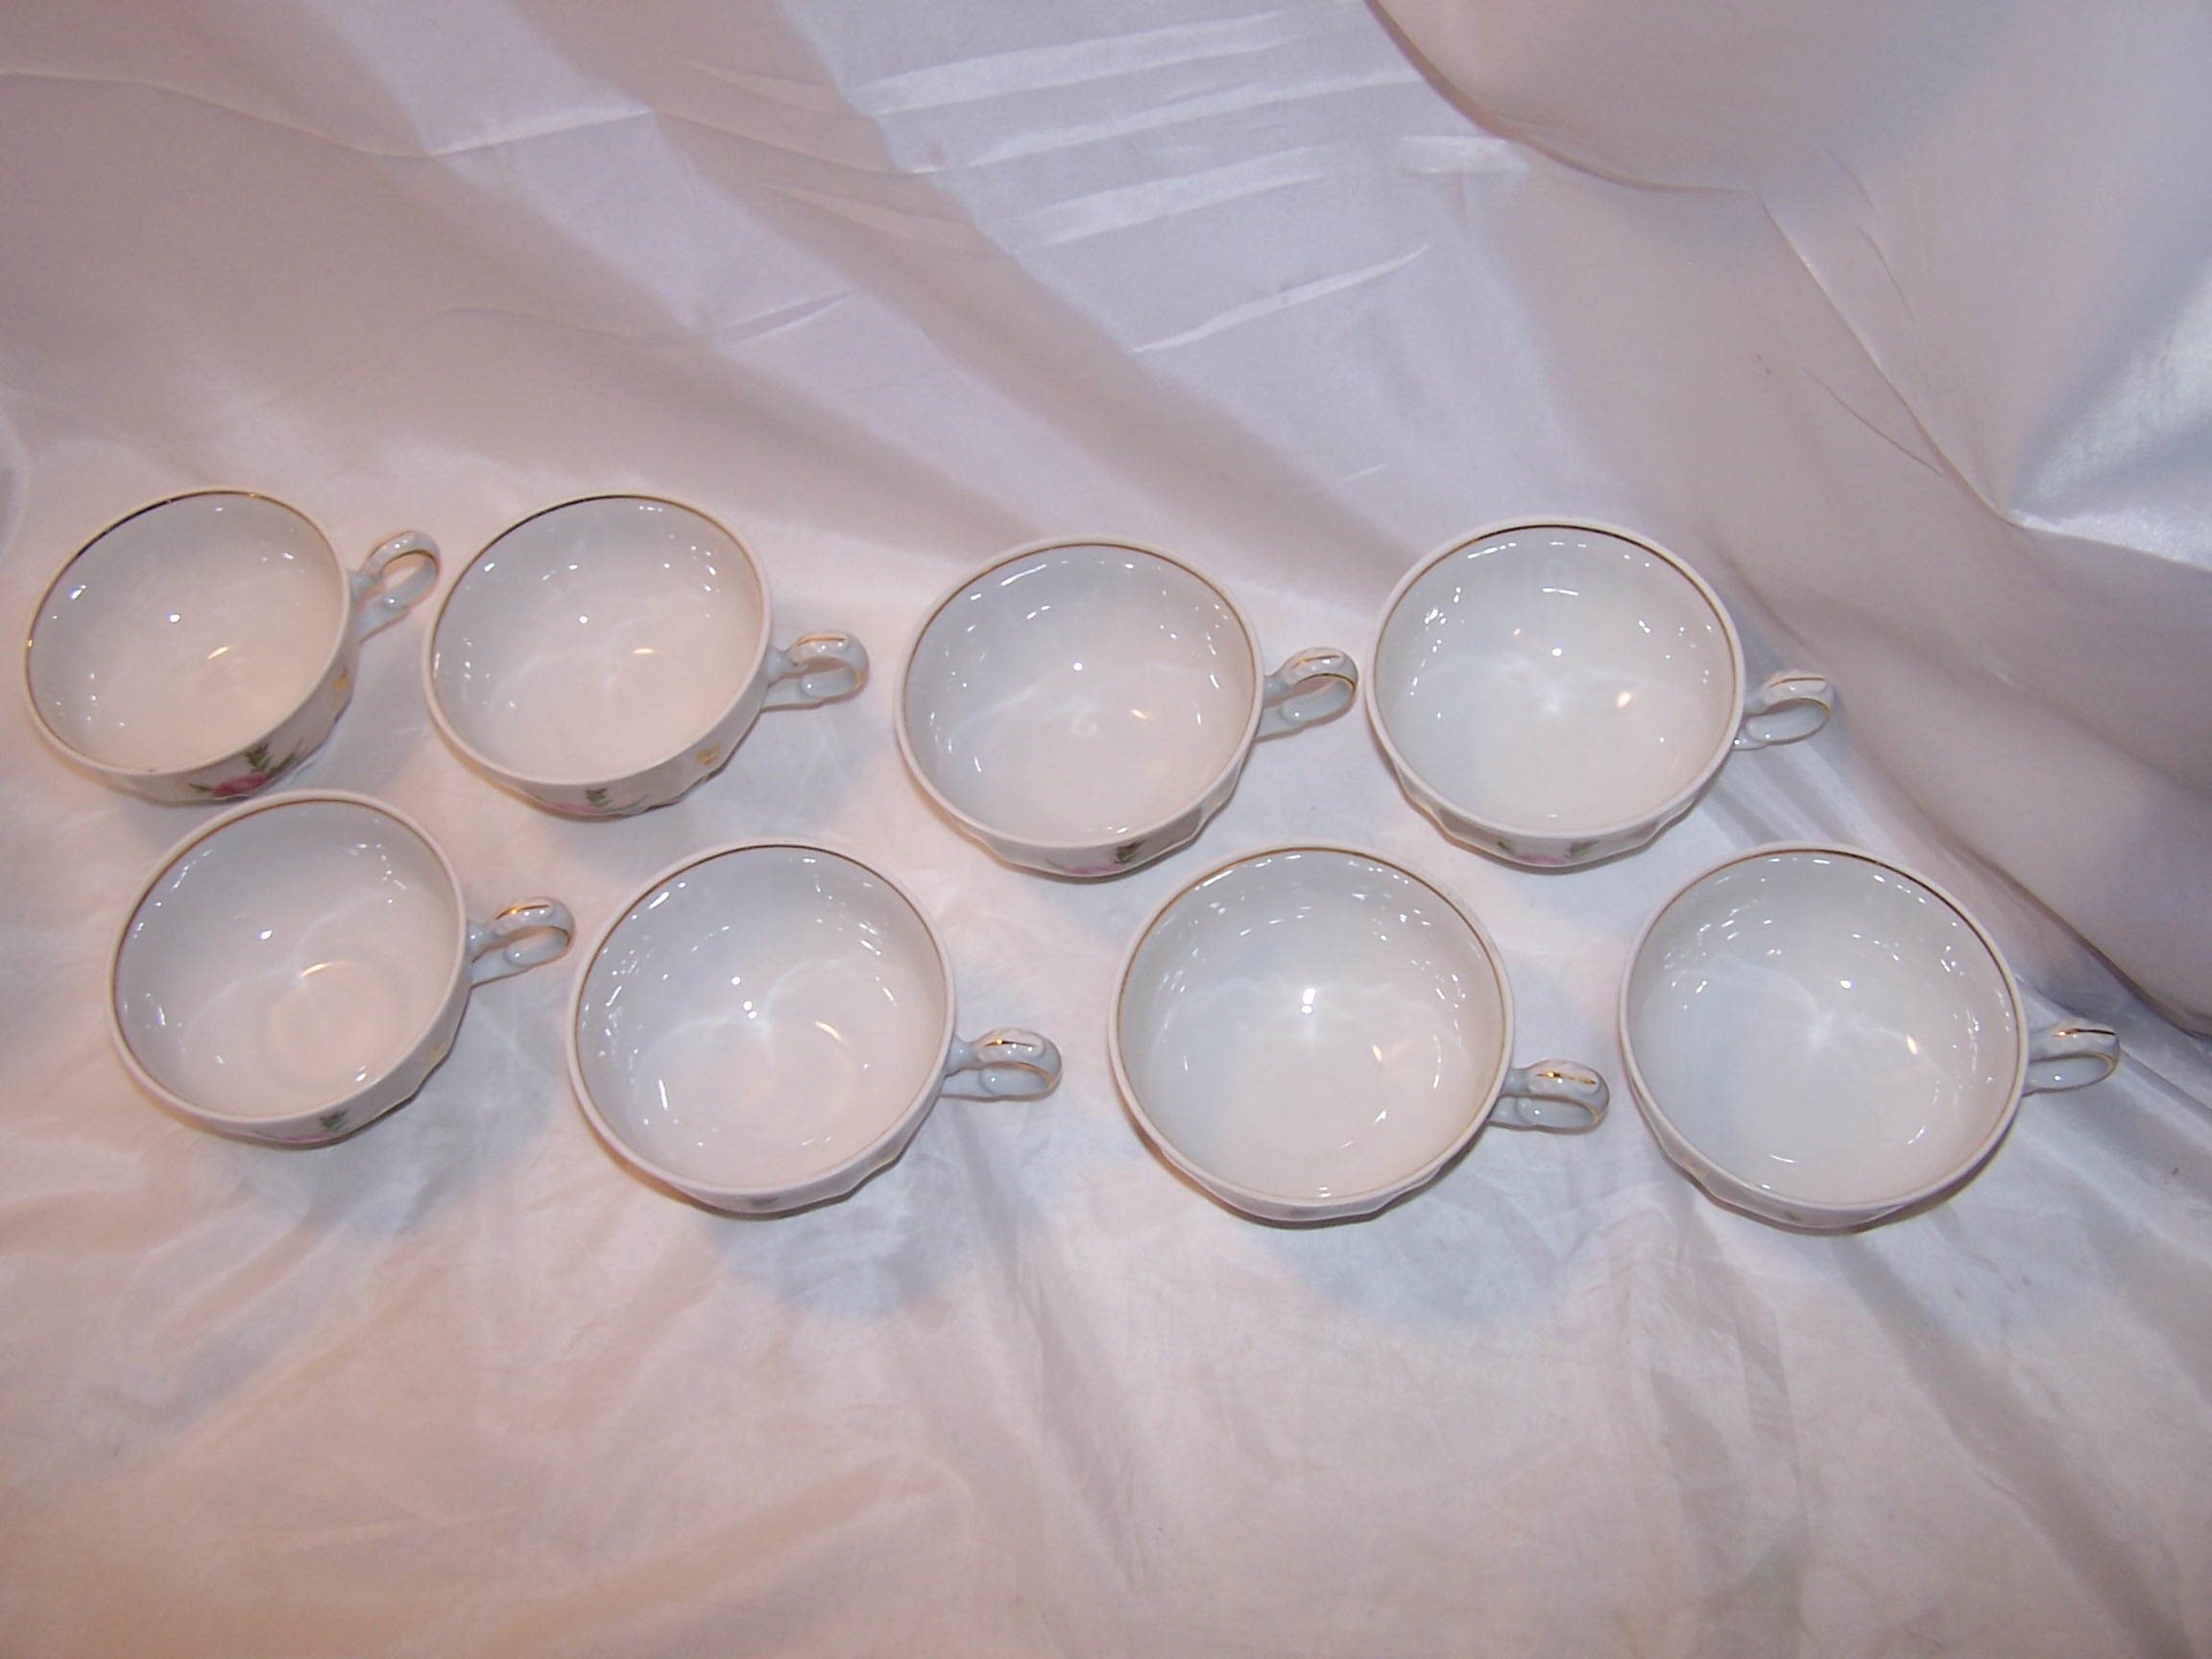 Image 4 of Bareuther Bavaria Dessert Service for 8, Germany, ca 1931 to 1950